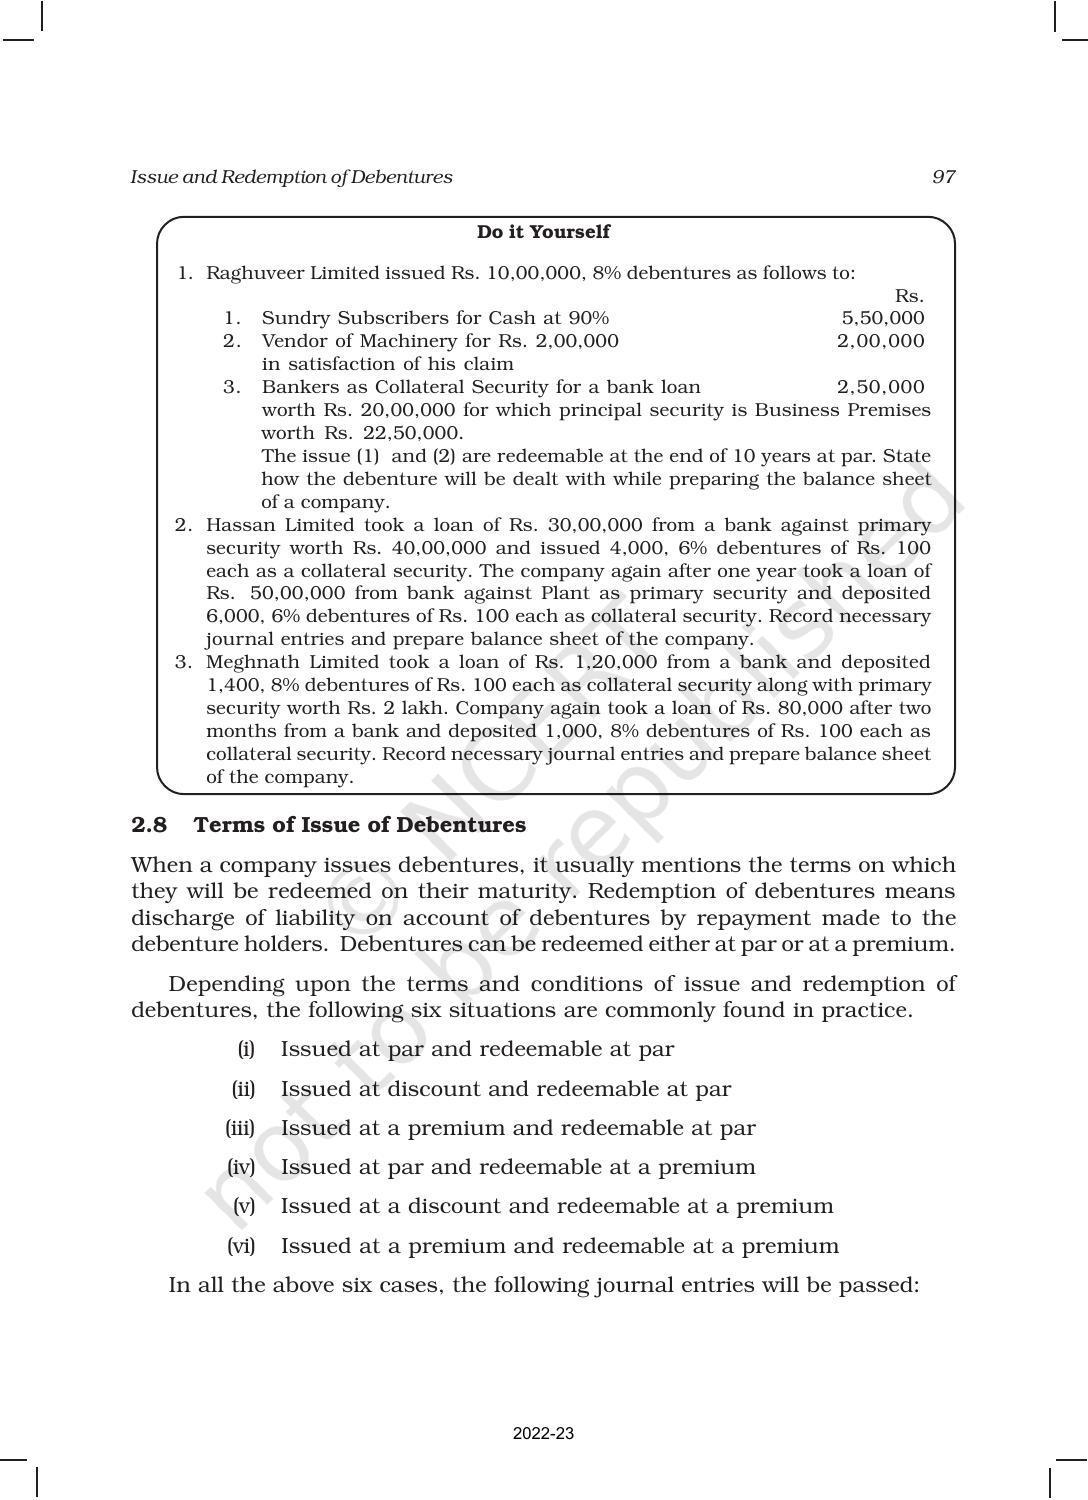 NCERT Book for Class 12 Accountancy Part II Chapter 1 Issue and Redemption of Debentures - Page 23